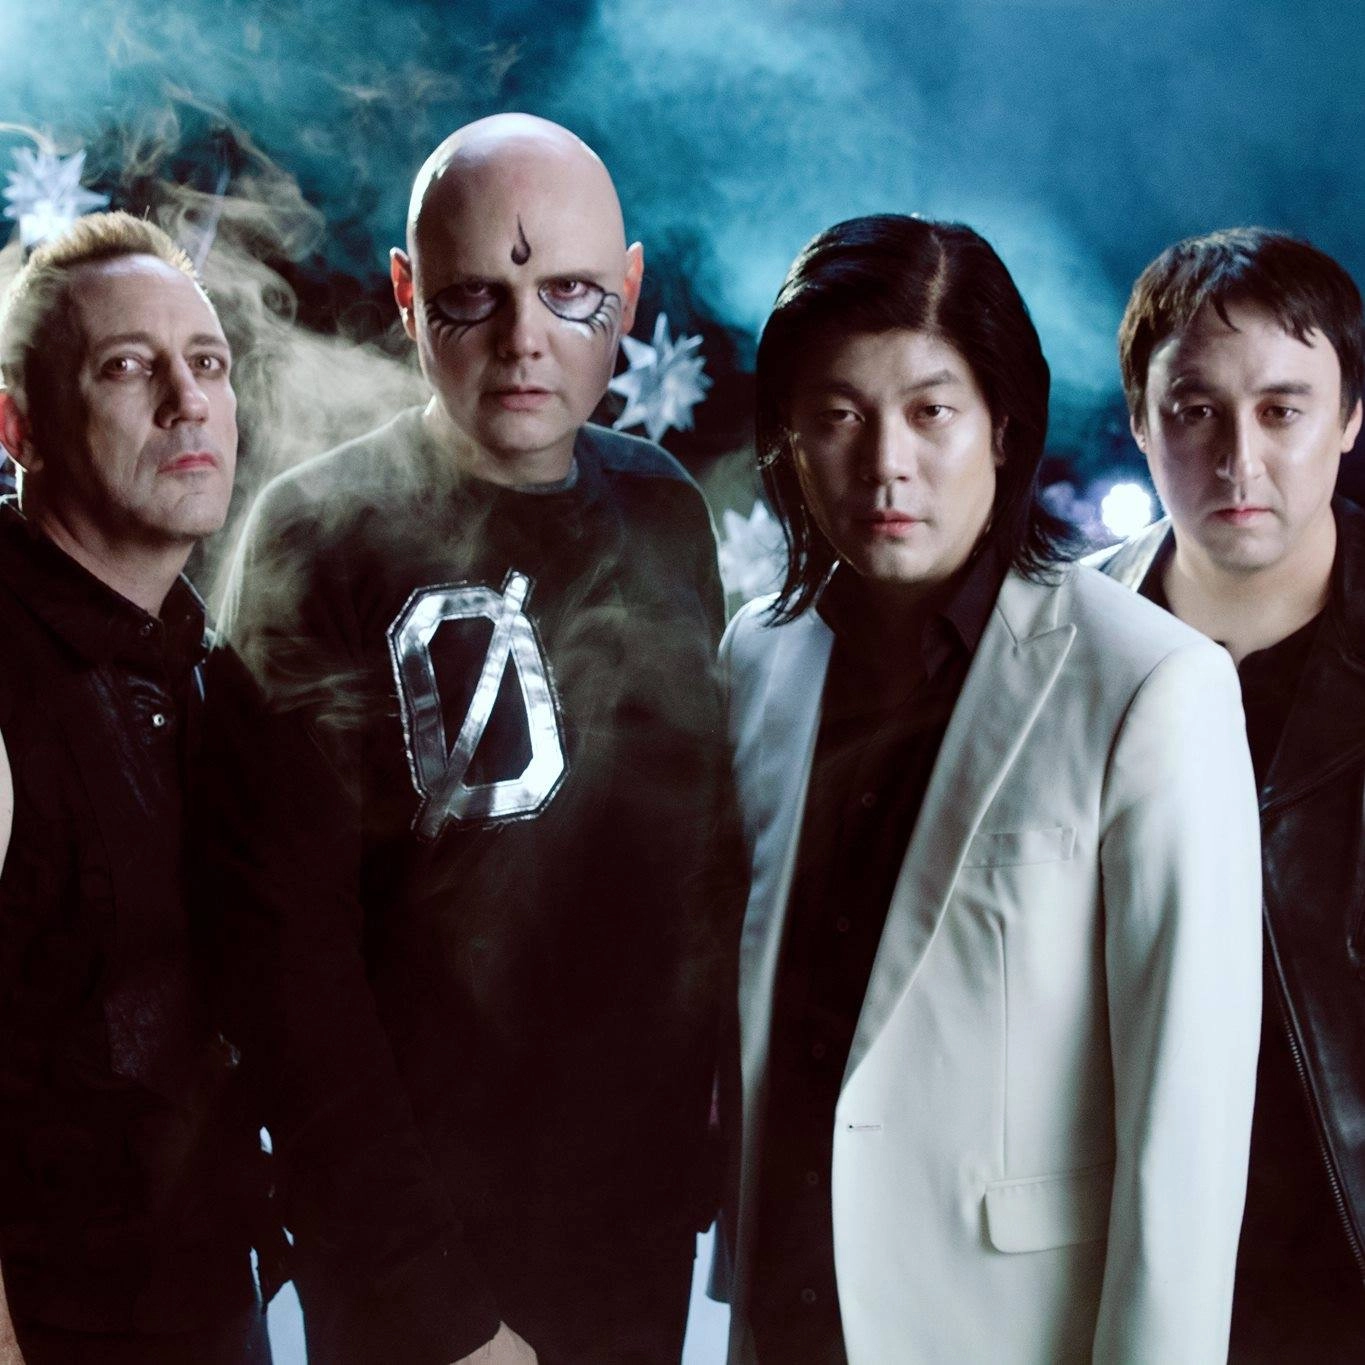 The Smashing Pumpkins - The World Is A Vampire 2024 en Arena Gliwice Tickets